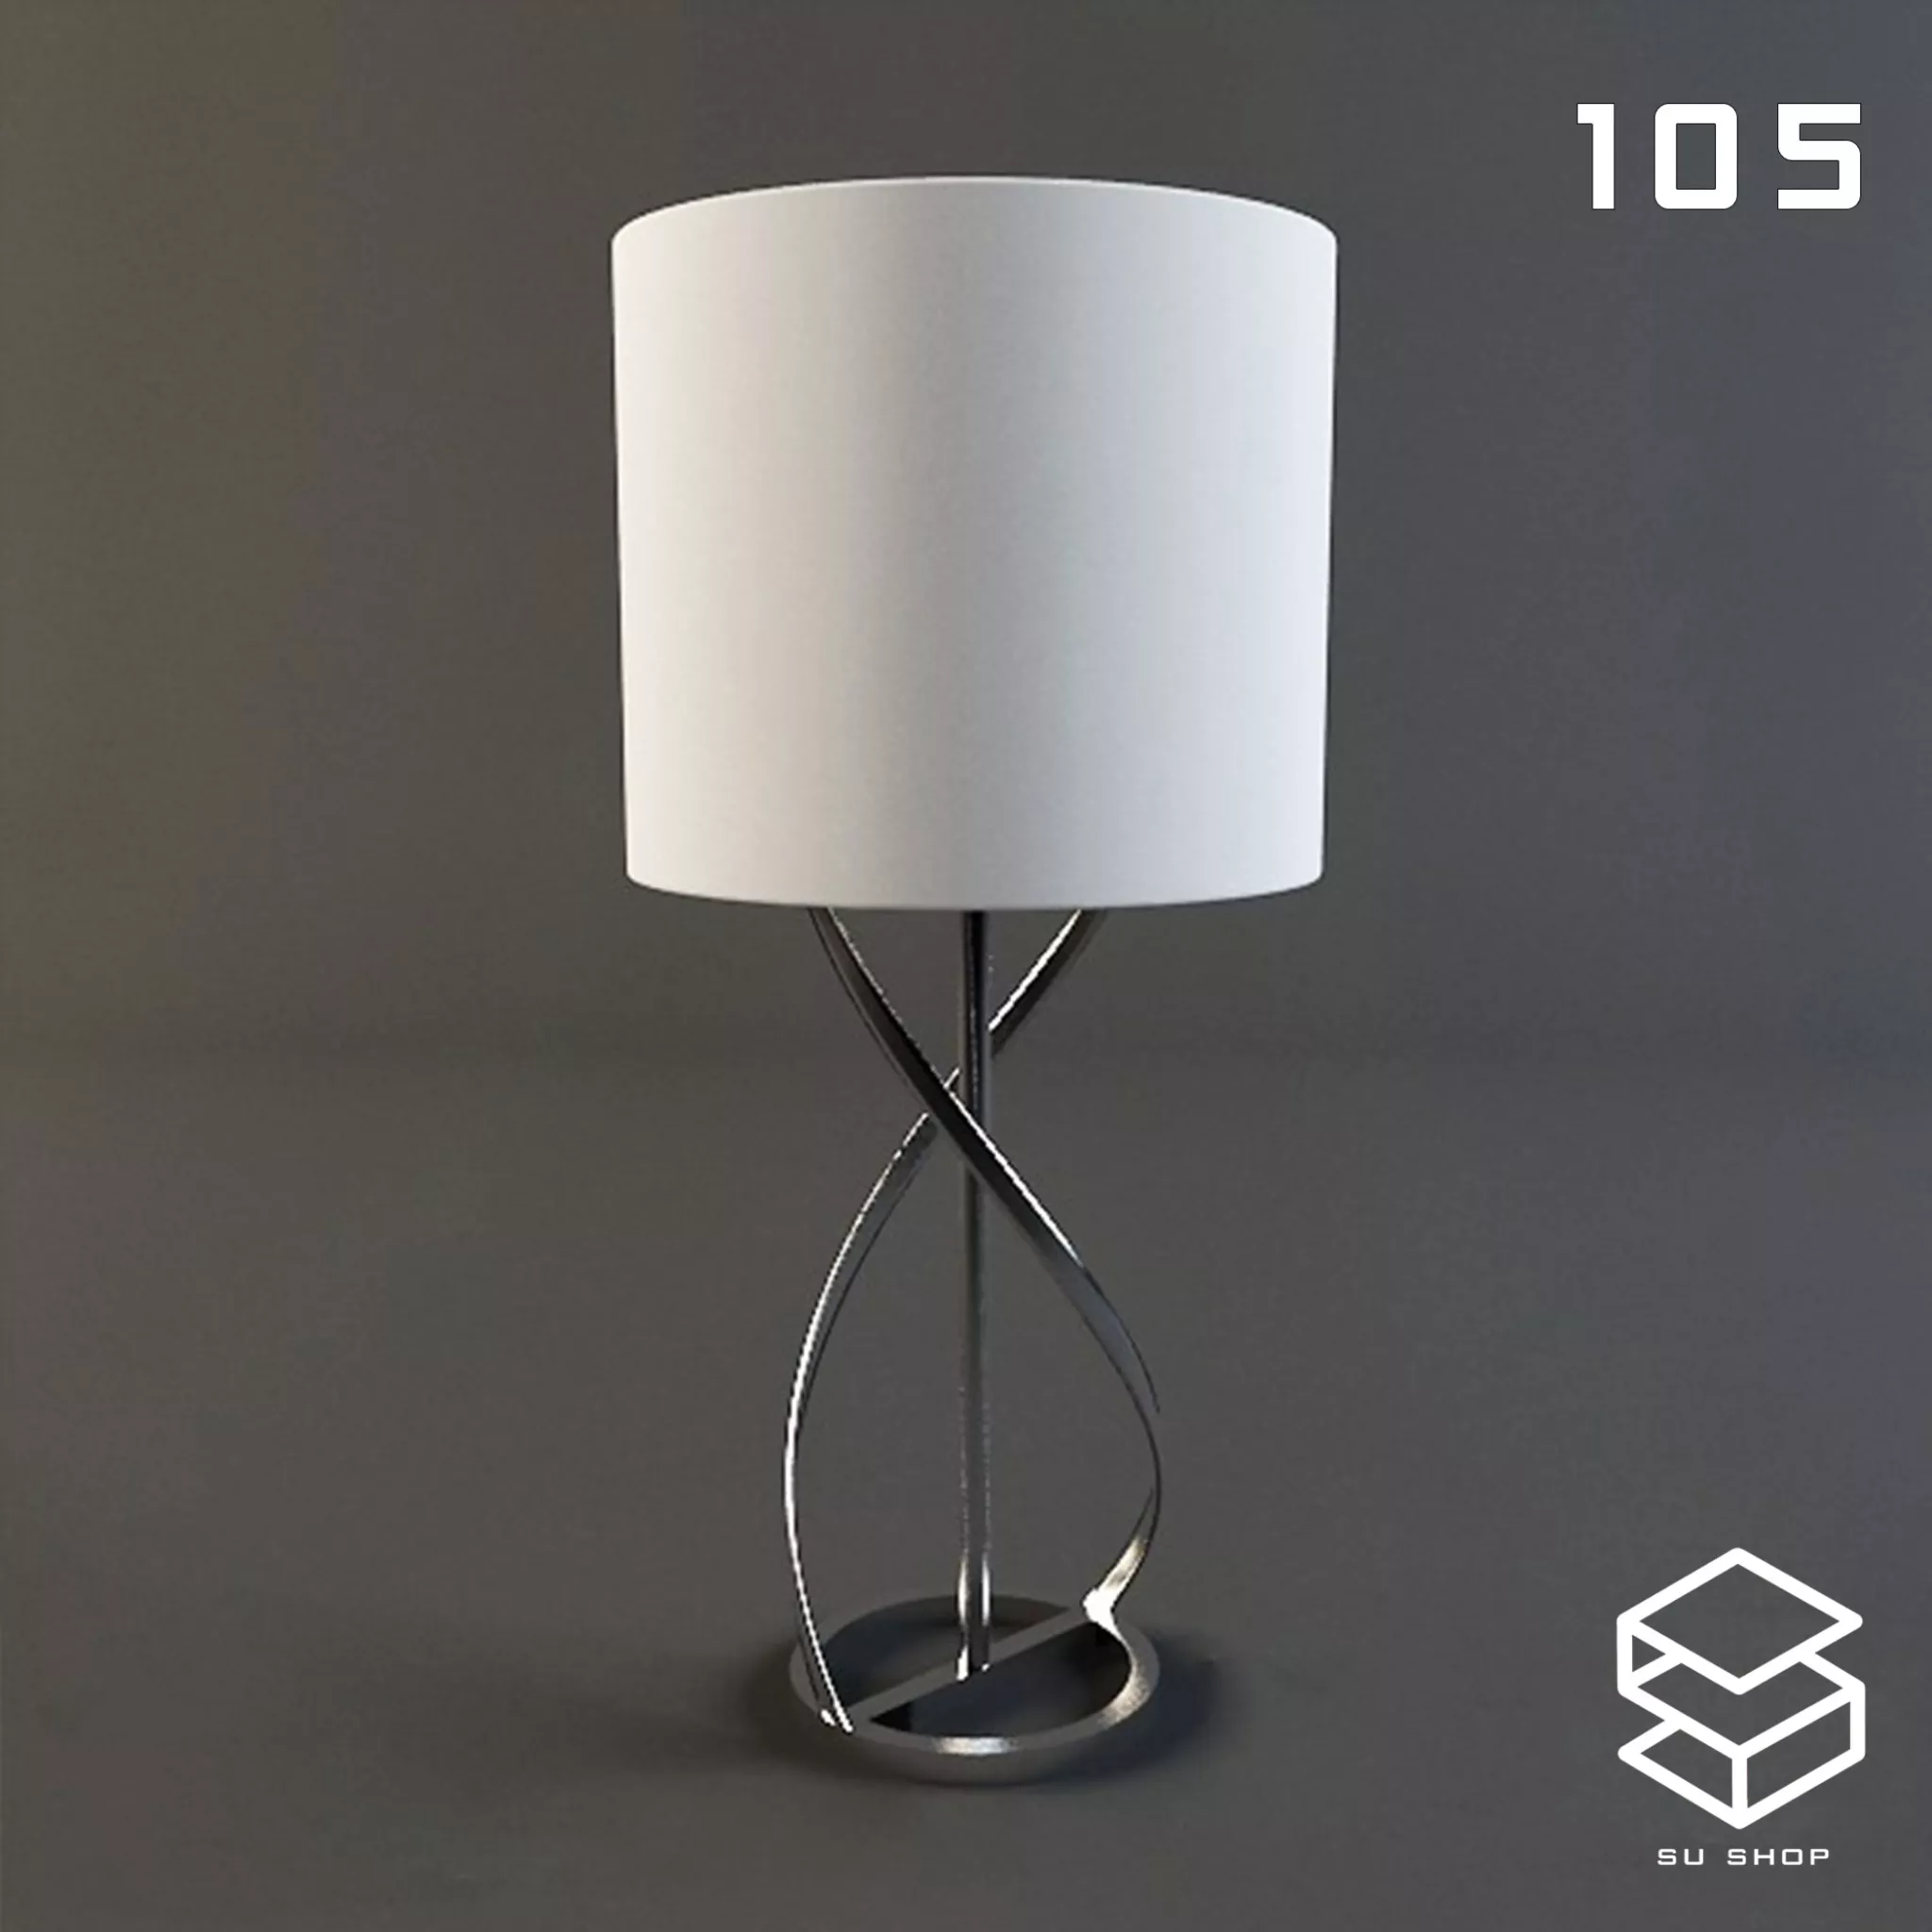 MODERN TABLE LAMP - SKETCHUP 3D MODEL - VRAY OR ENSCAPE - ID14670